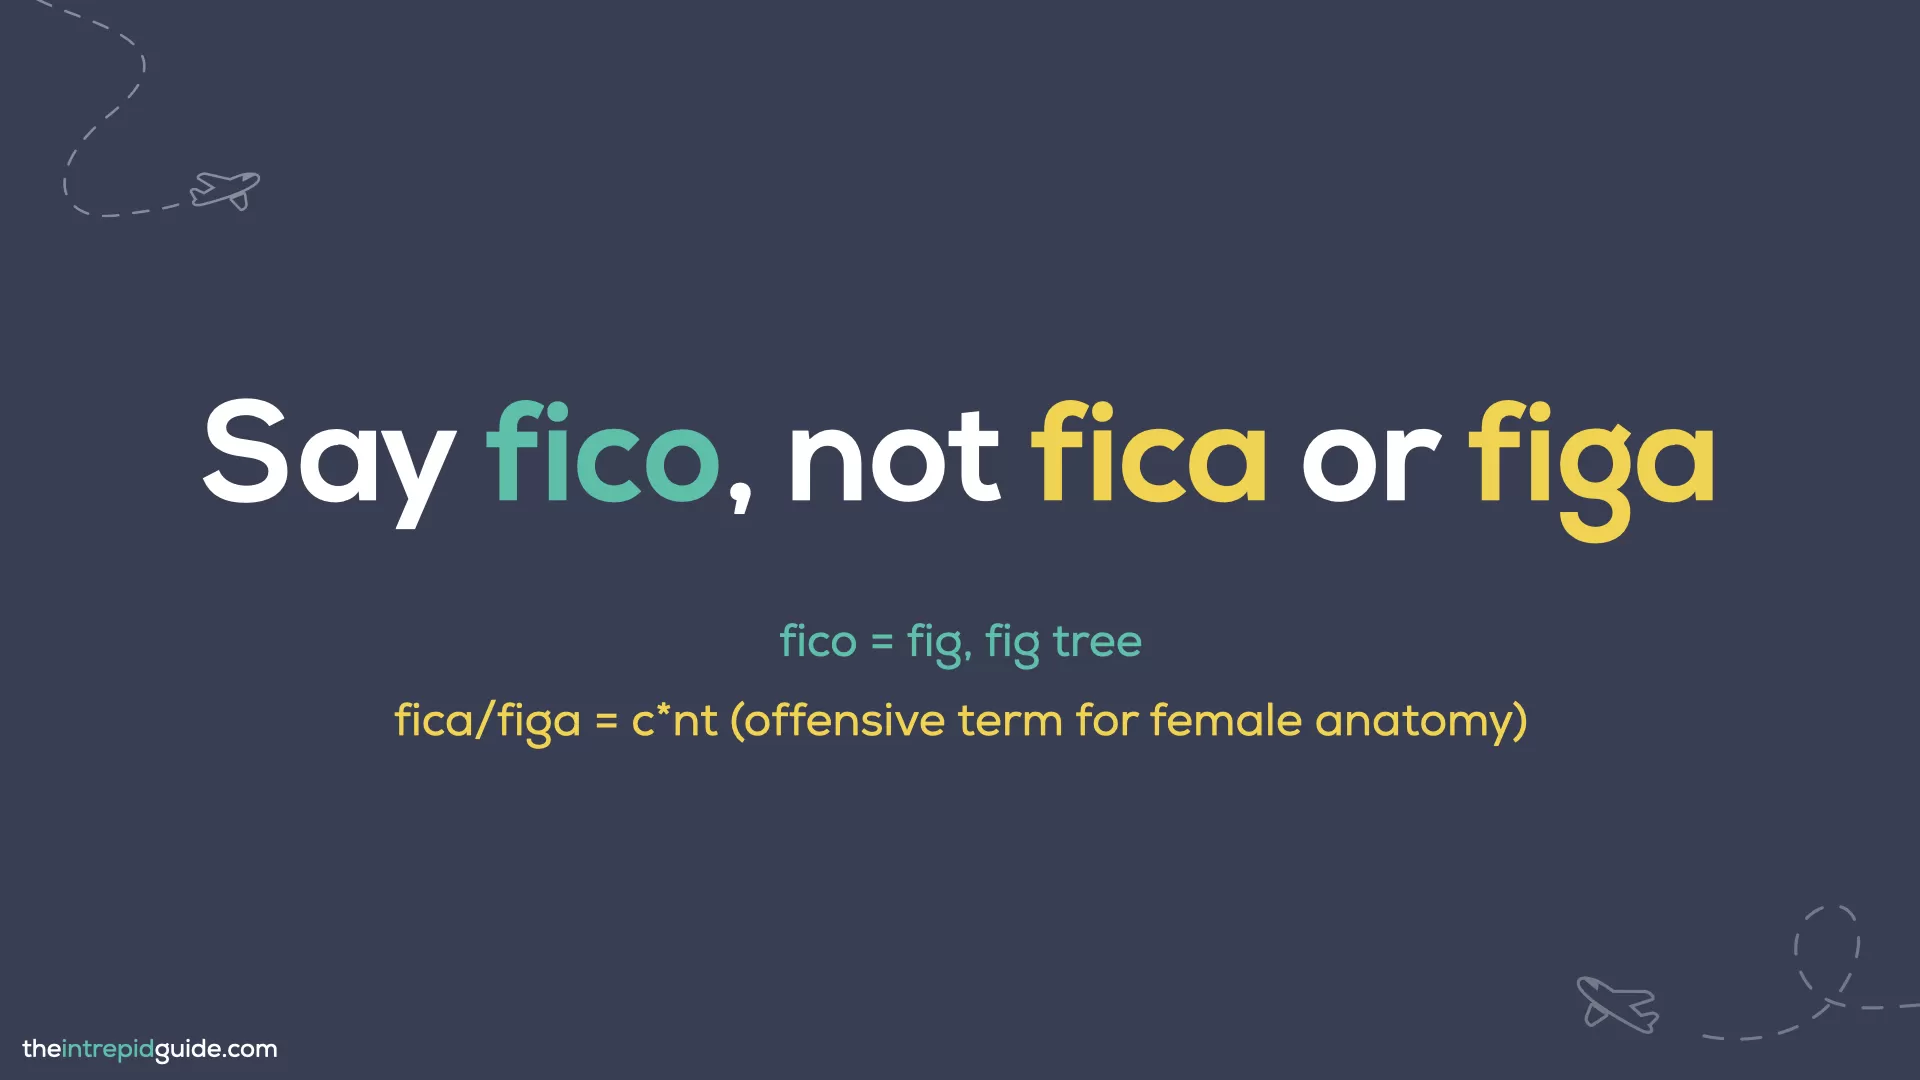 Italian Words You Should Never Mispronounce - Say fico, not fica or figa